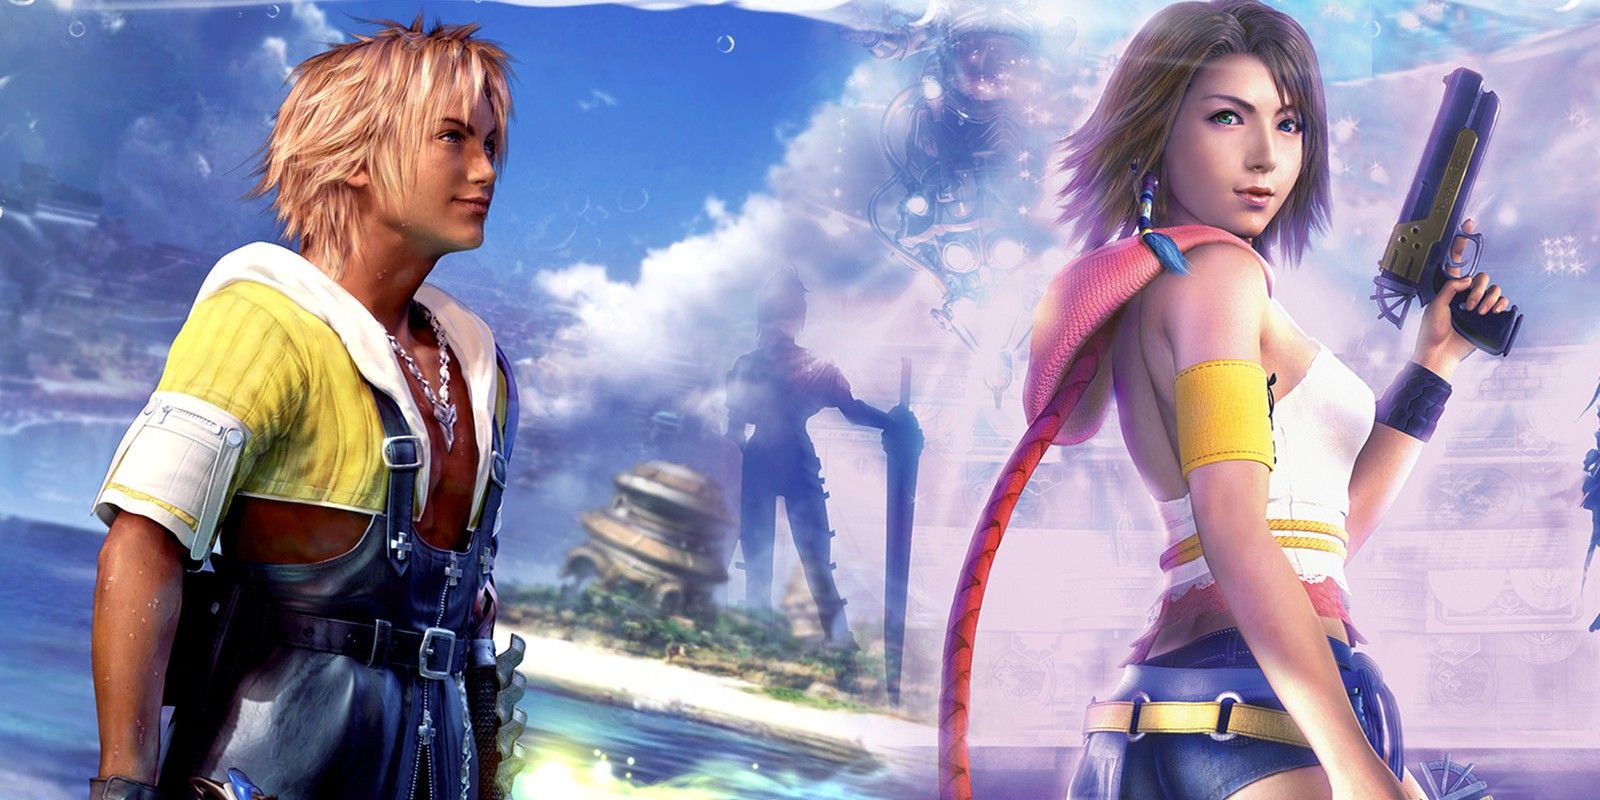 Why Final Fantasy X3 May Happen After FF7 Remake